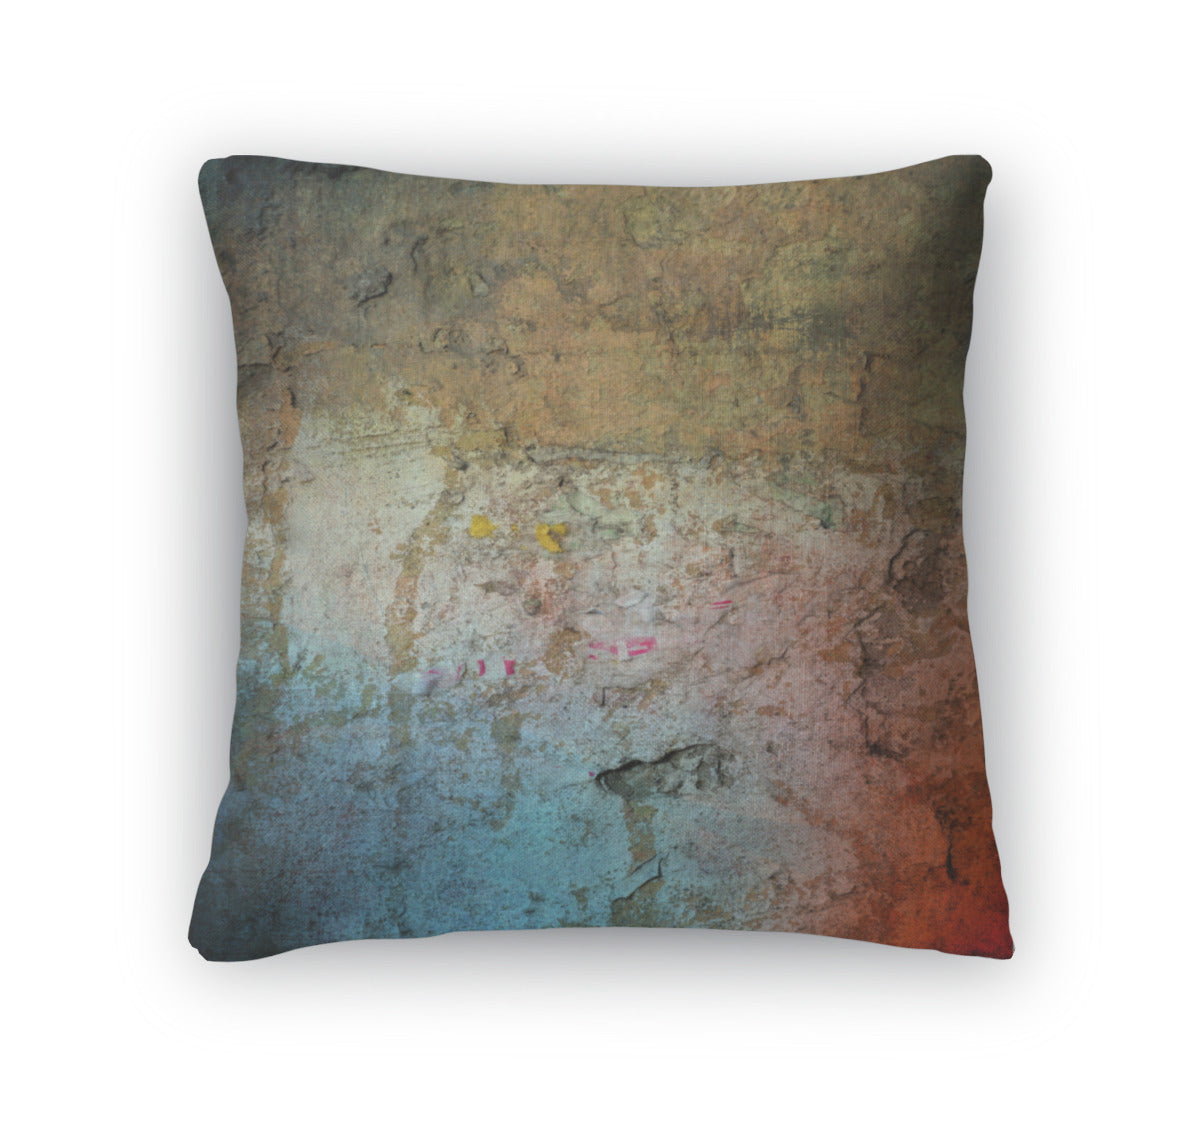 Throw Pillow, Grunge Colorful